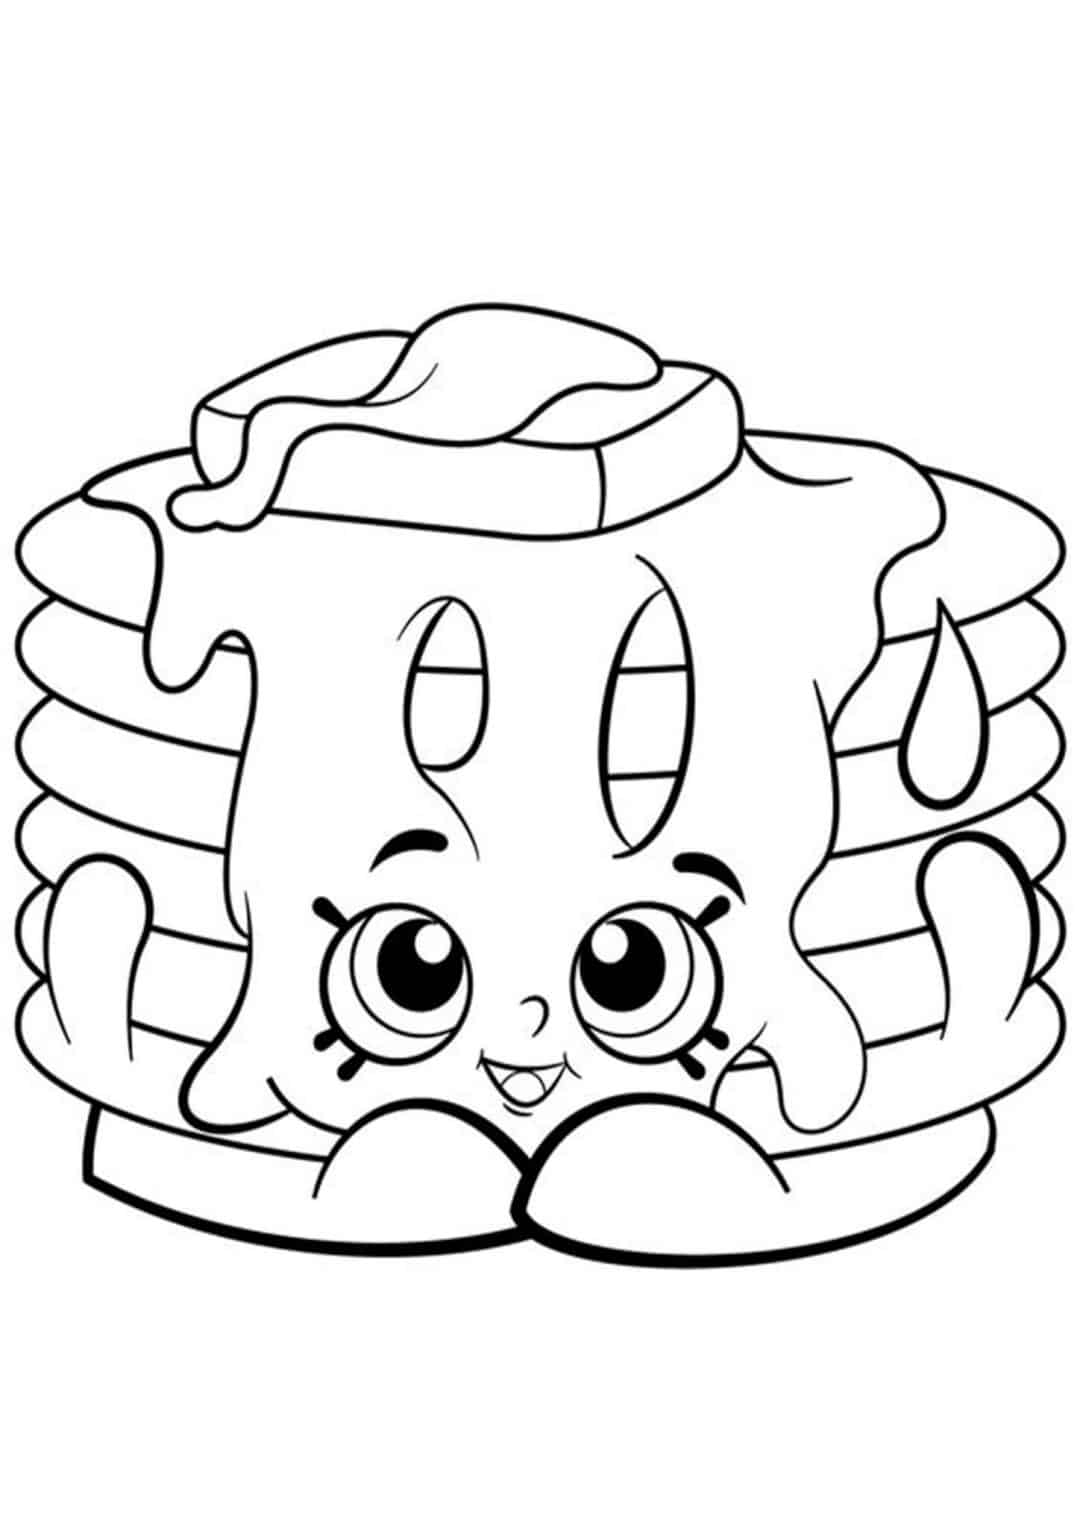 Free & Easy To Print Shopkins Coloring Pages - Tulamama